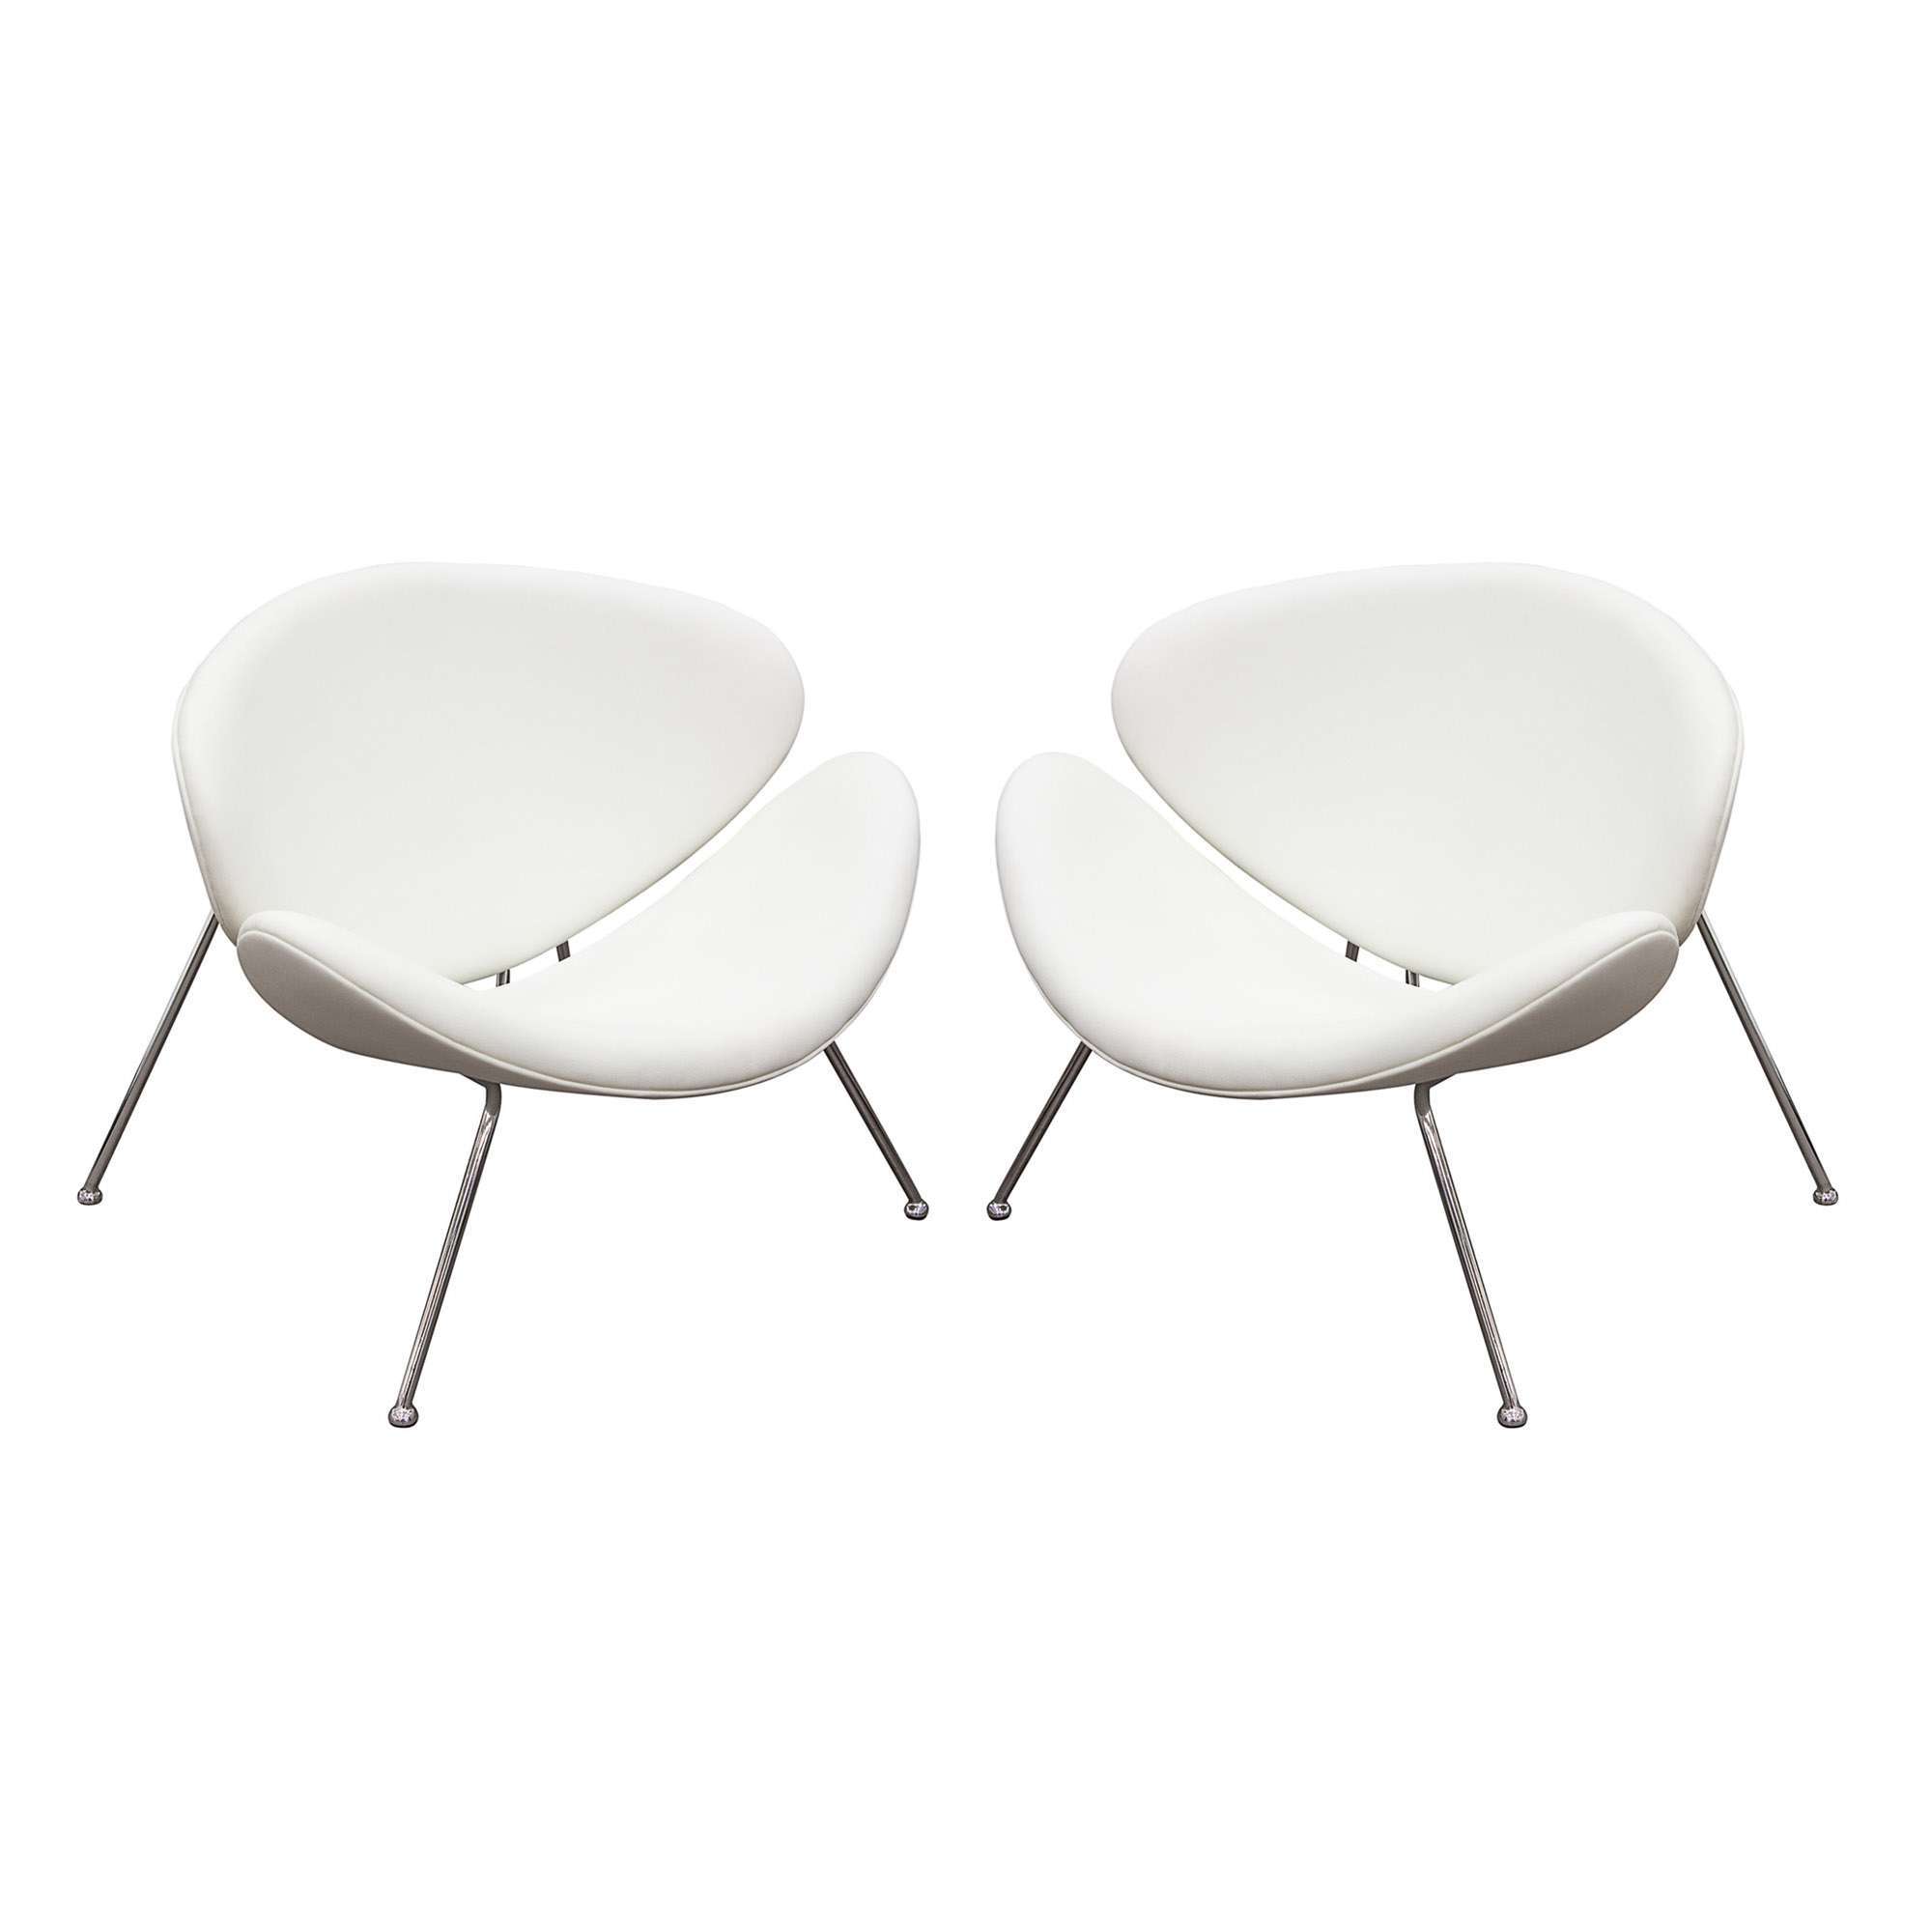 Set of (2) Roxy White Accent Chair by Diamond Sofa - Decorian Group